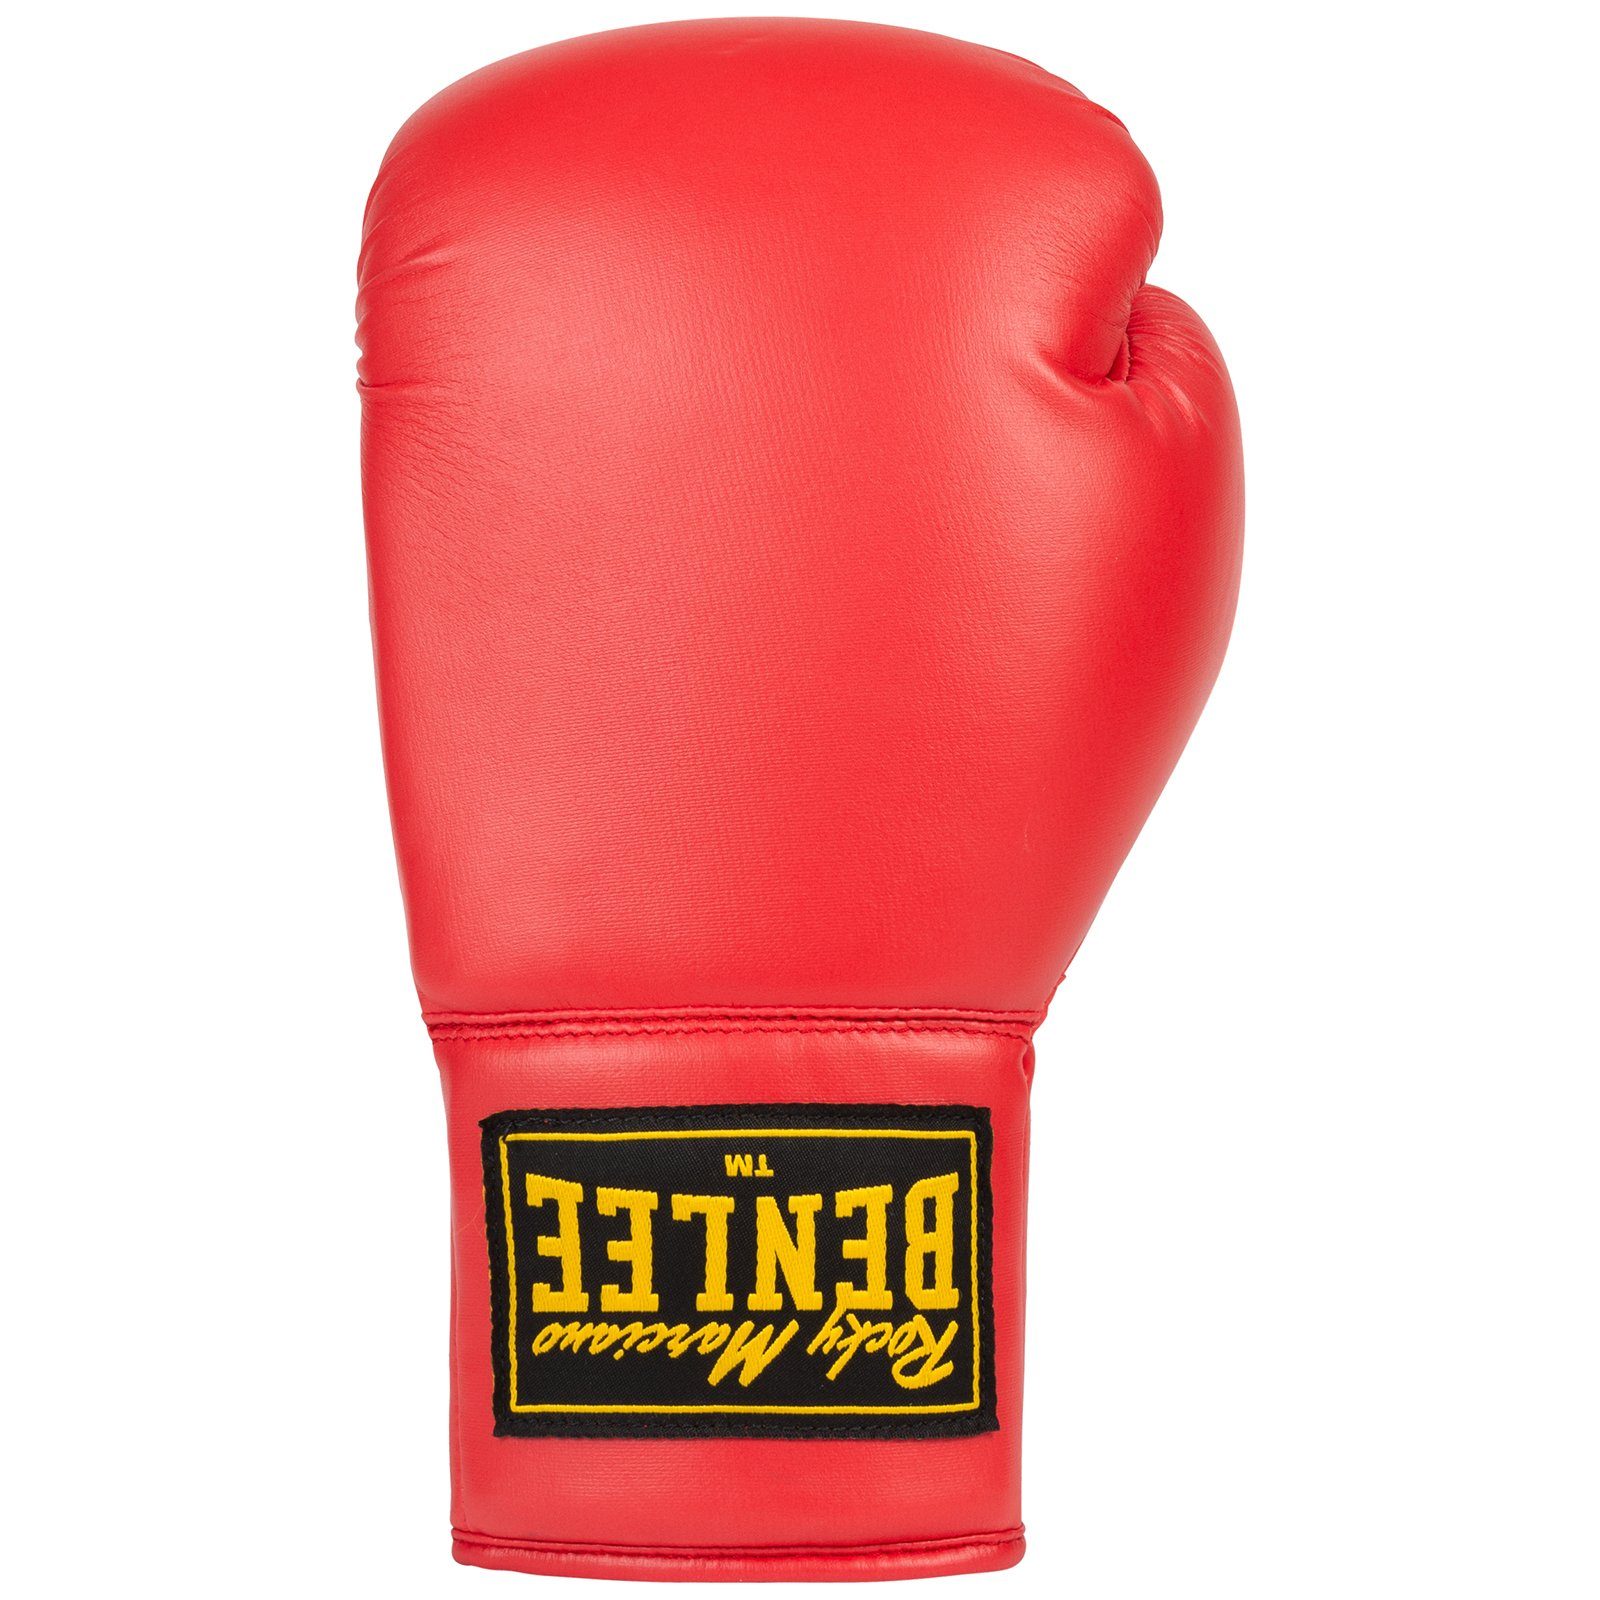 GLOVES Benlee AUTOGRAPH Boxhandschuhe Rocky Marciano Red